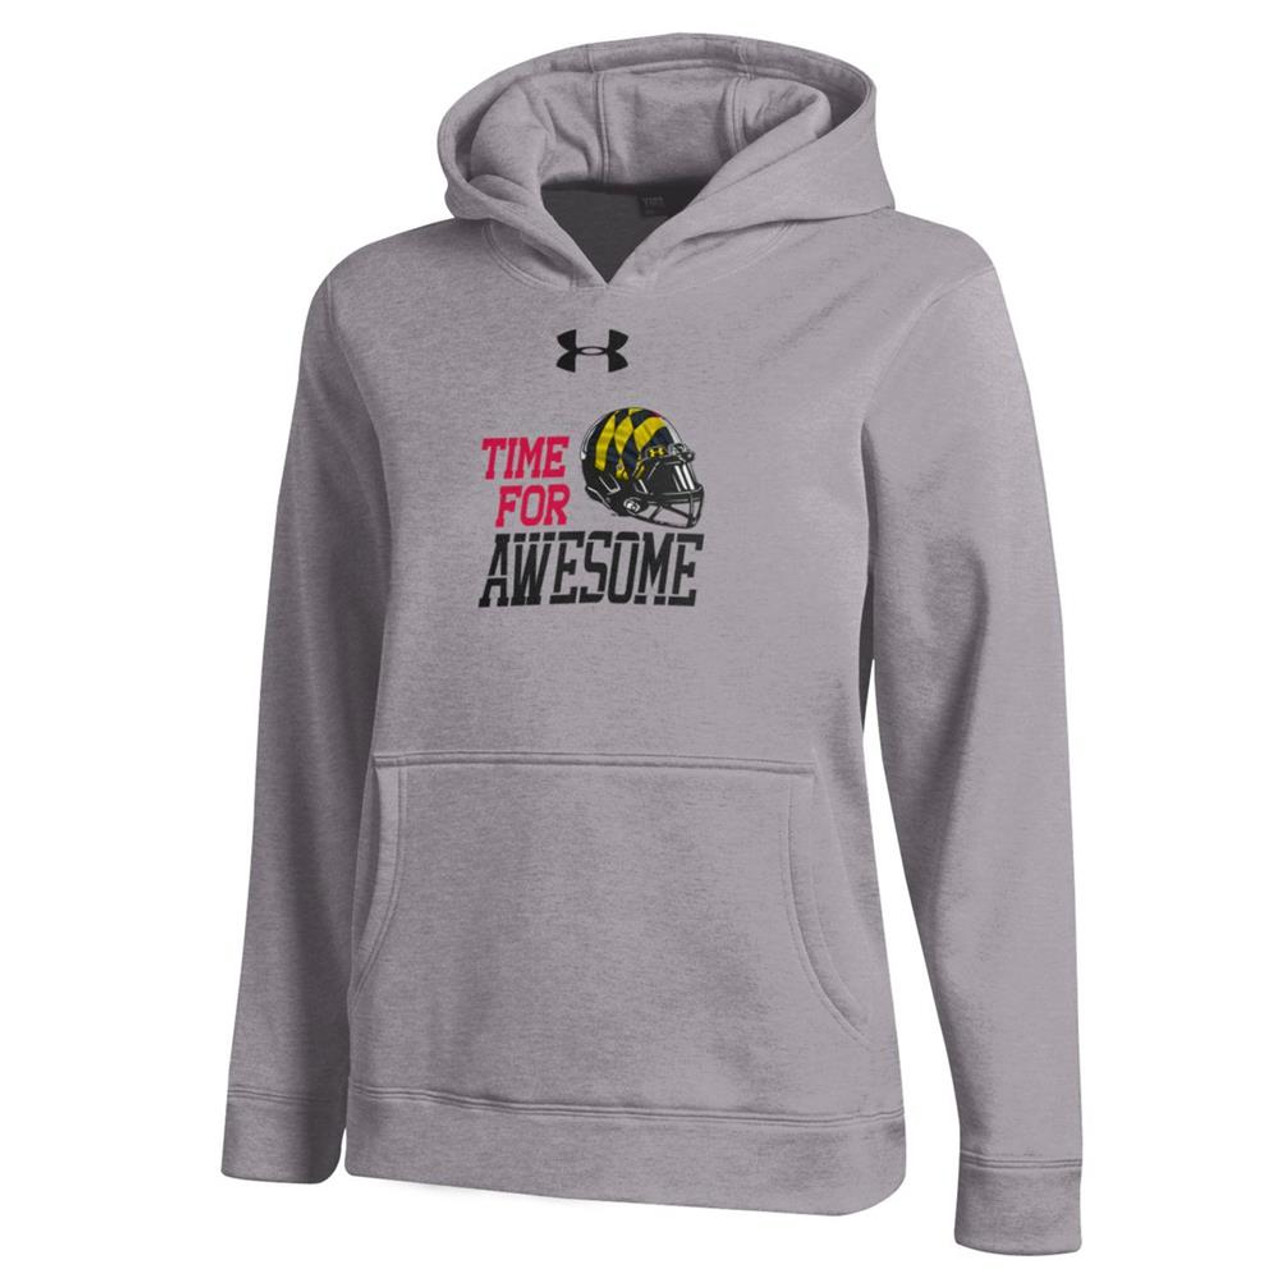 under armour maryland hoodie